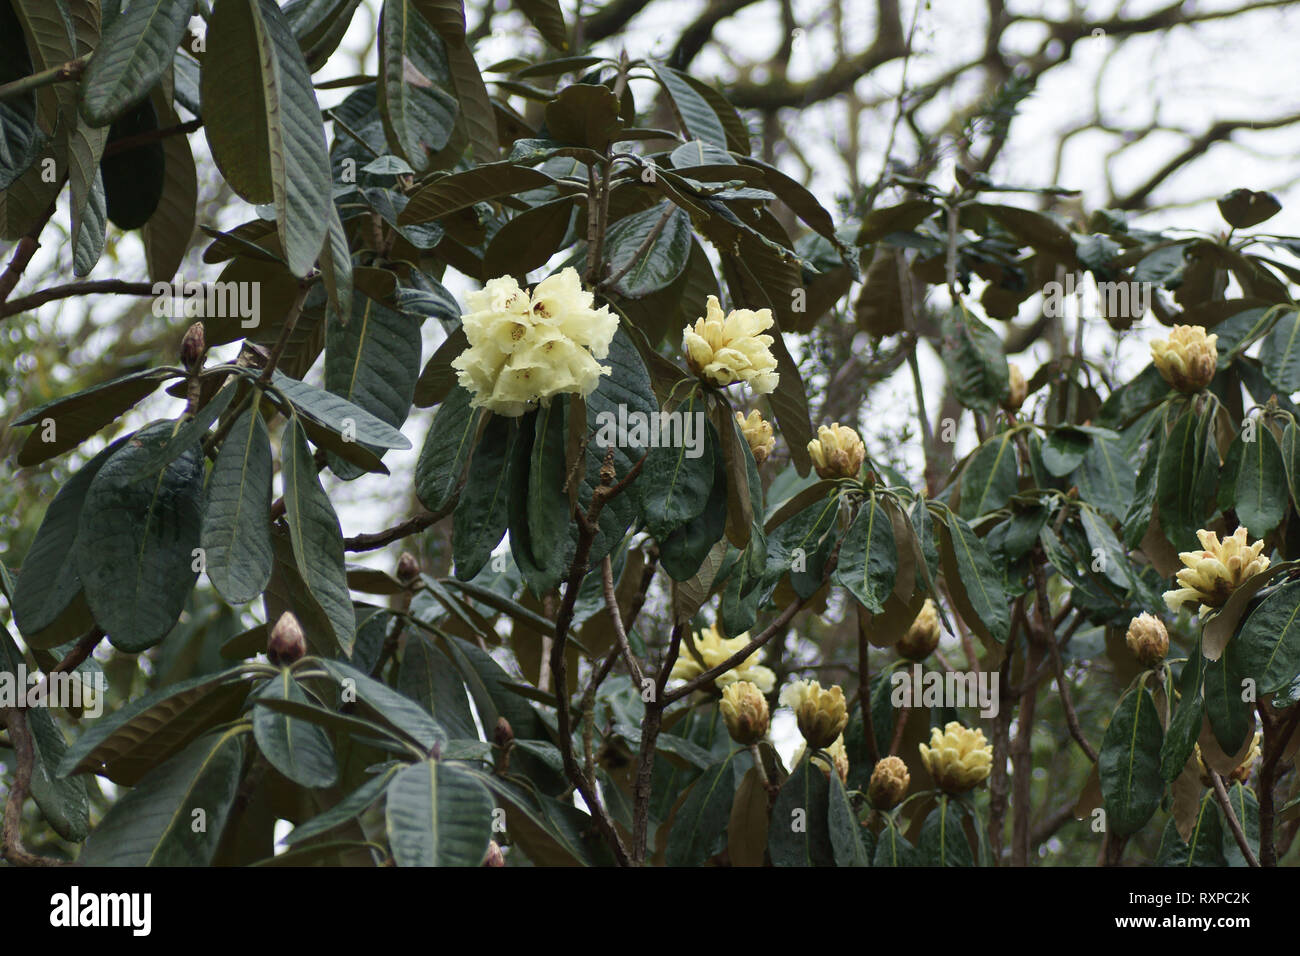 Rhododendron macabeanum at Clyne gardens, Swansea, Wales, UK. Stock Photo